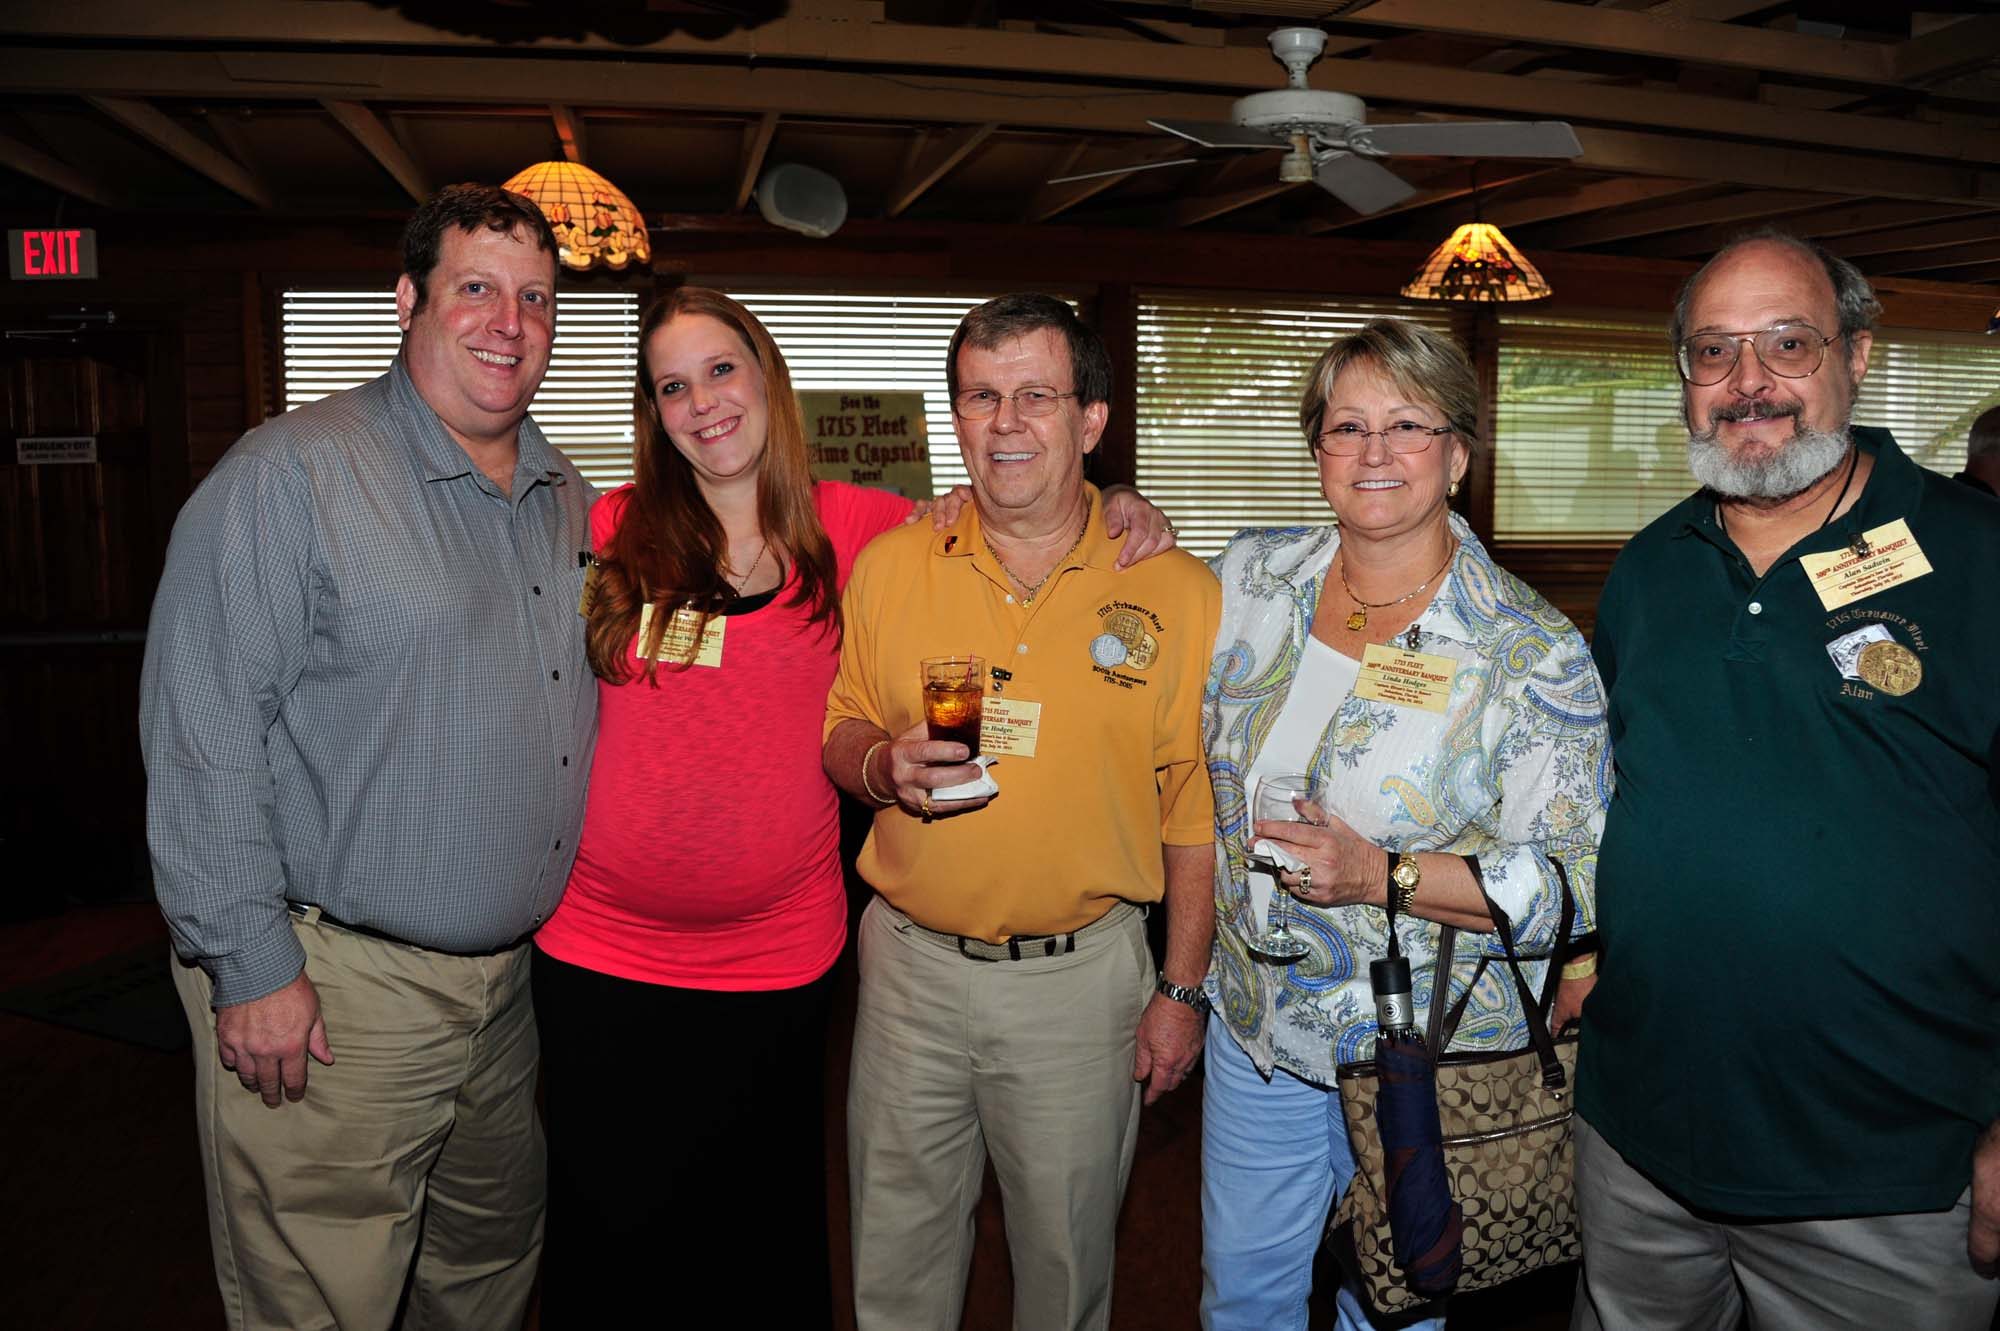 From left, Rob Westrick, his wife Stephanie, Steve and Linda Hodges, and Alan Sadwin